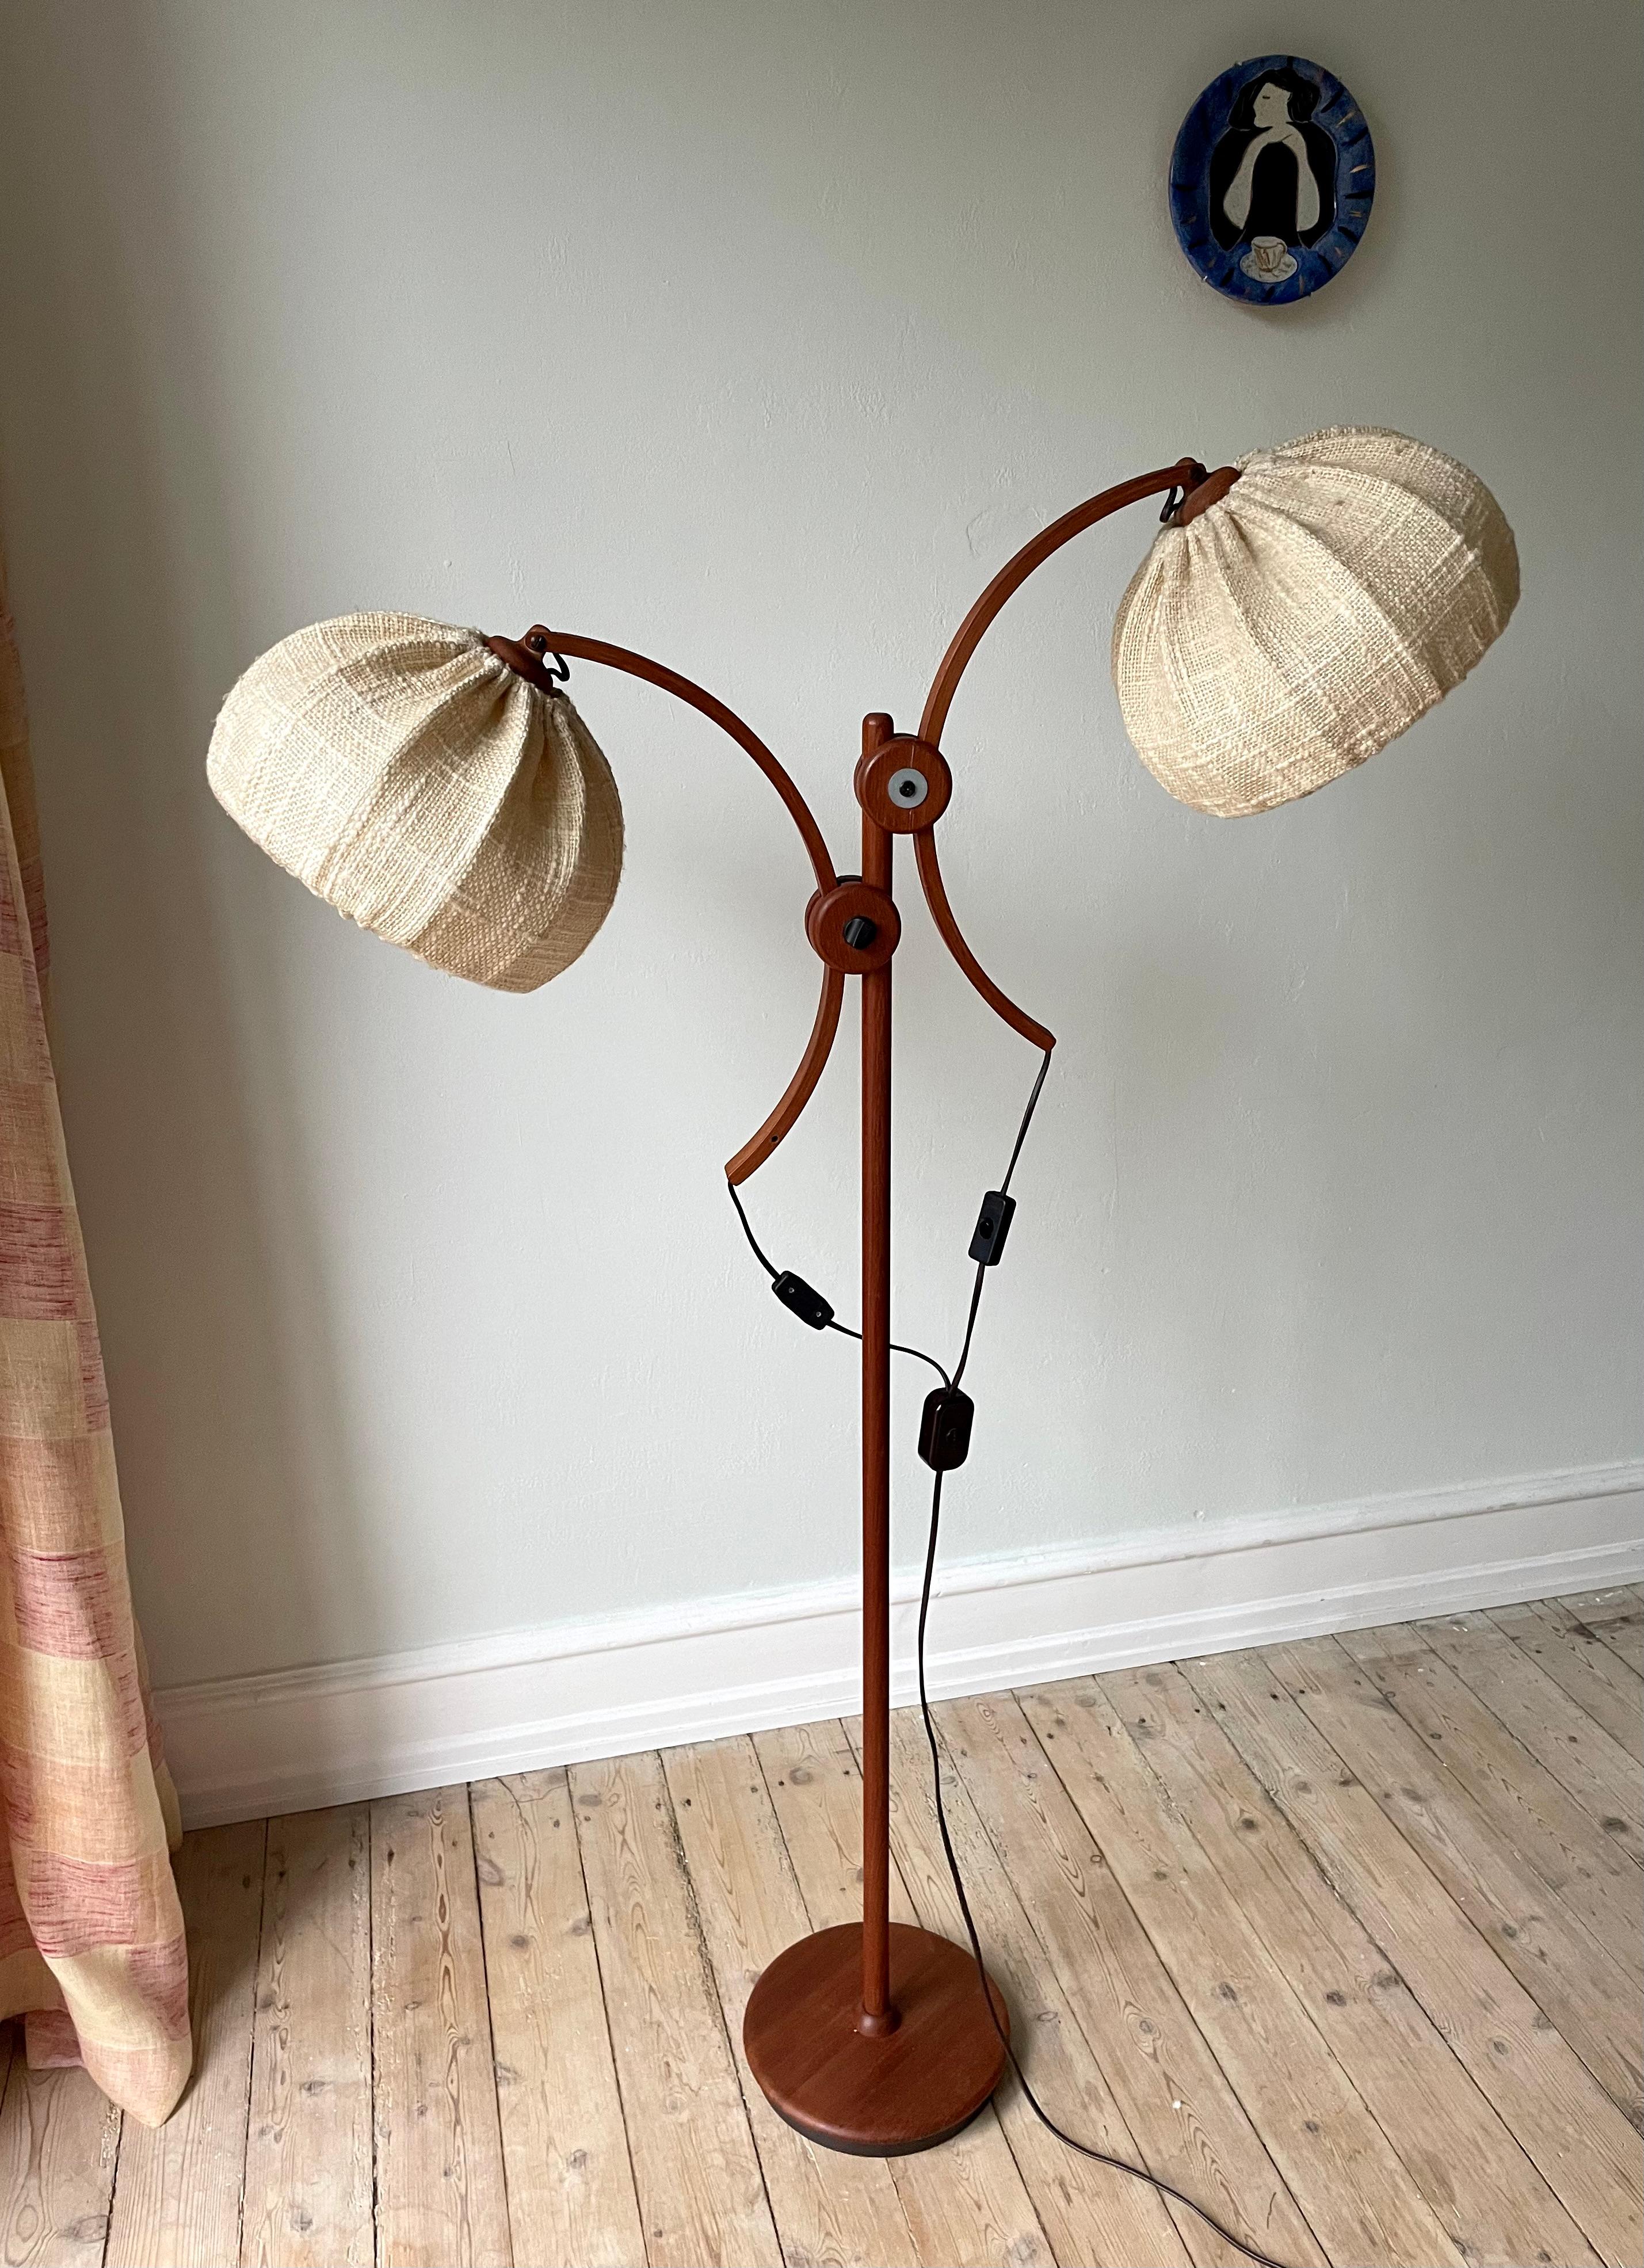 Organic midcentury modern wooden floor lamp with two semi circle adjustable shades in golden sand colored thick textile. Manufactured in the 1960s by Temde Leuchten (attr.). Two semi circle arms of bent wood that are adjustable in every direction on